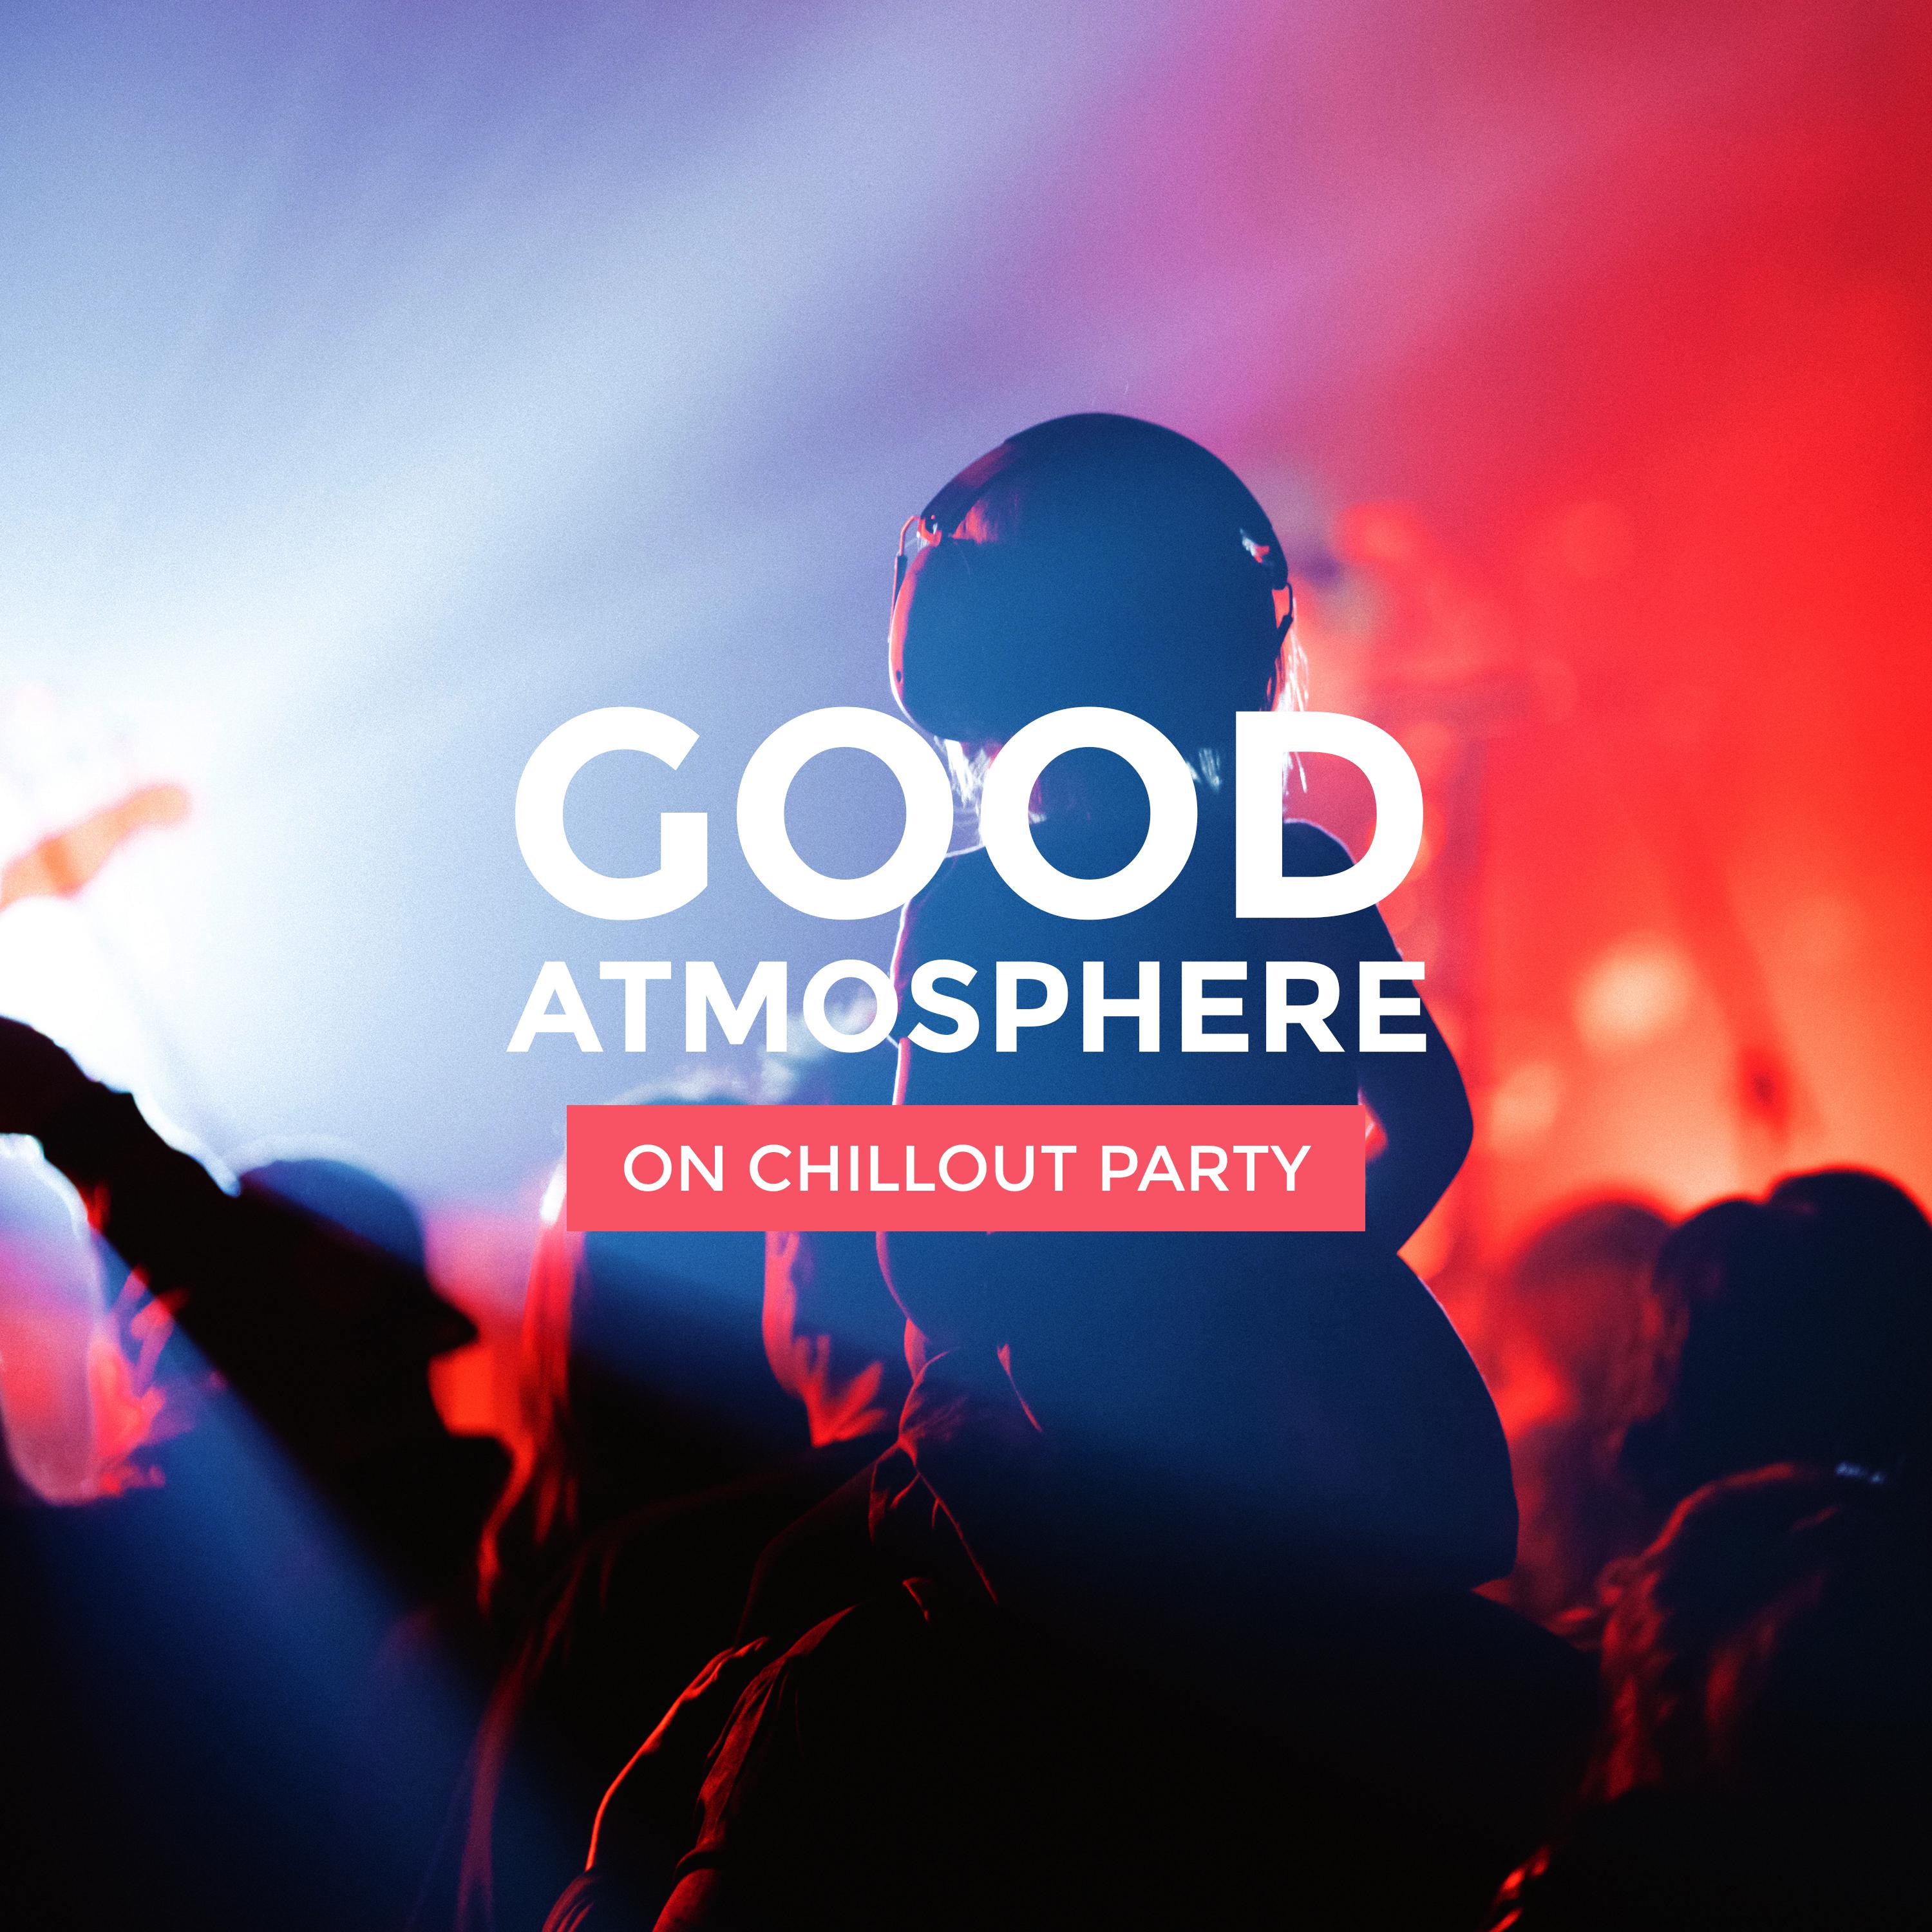 Good Atmosphere on Chillout Party: Compilation of Best Party Chill Out Music 2019, Deep Pumping Beats & Smooth Melodies Created for Fun with Friends, Pool & Cocktail Party, Chill Lounge Vibes